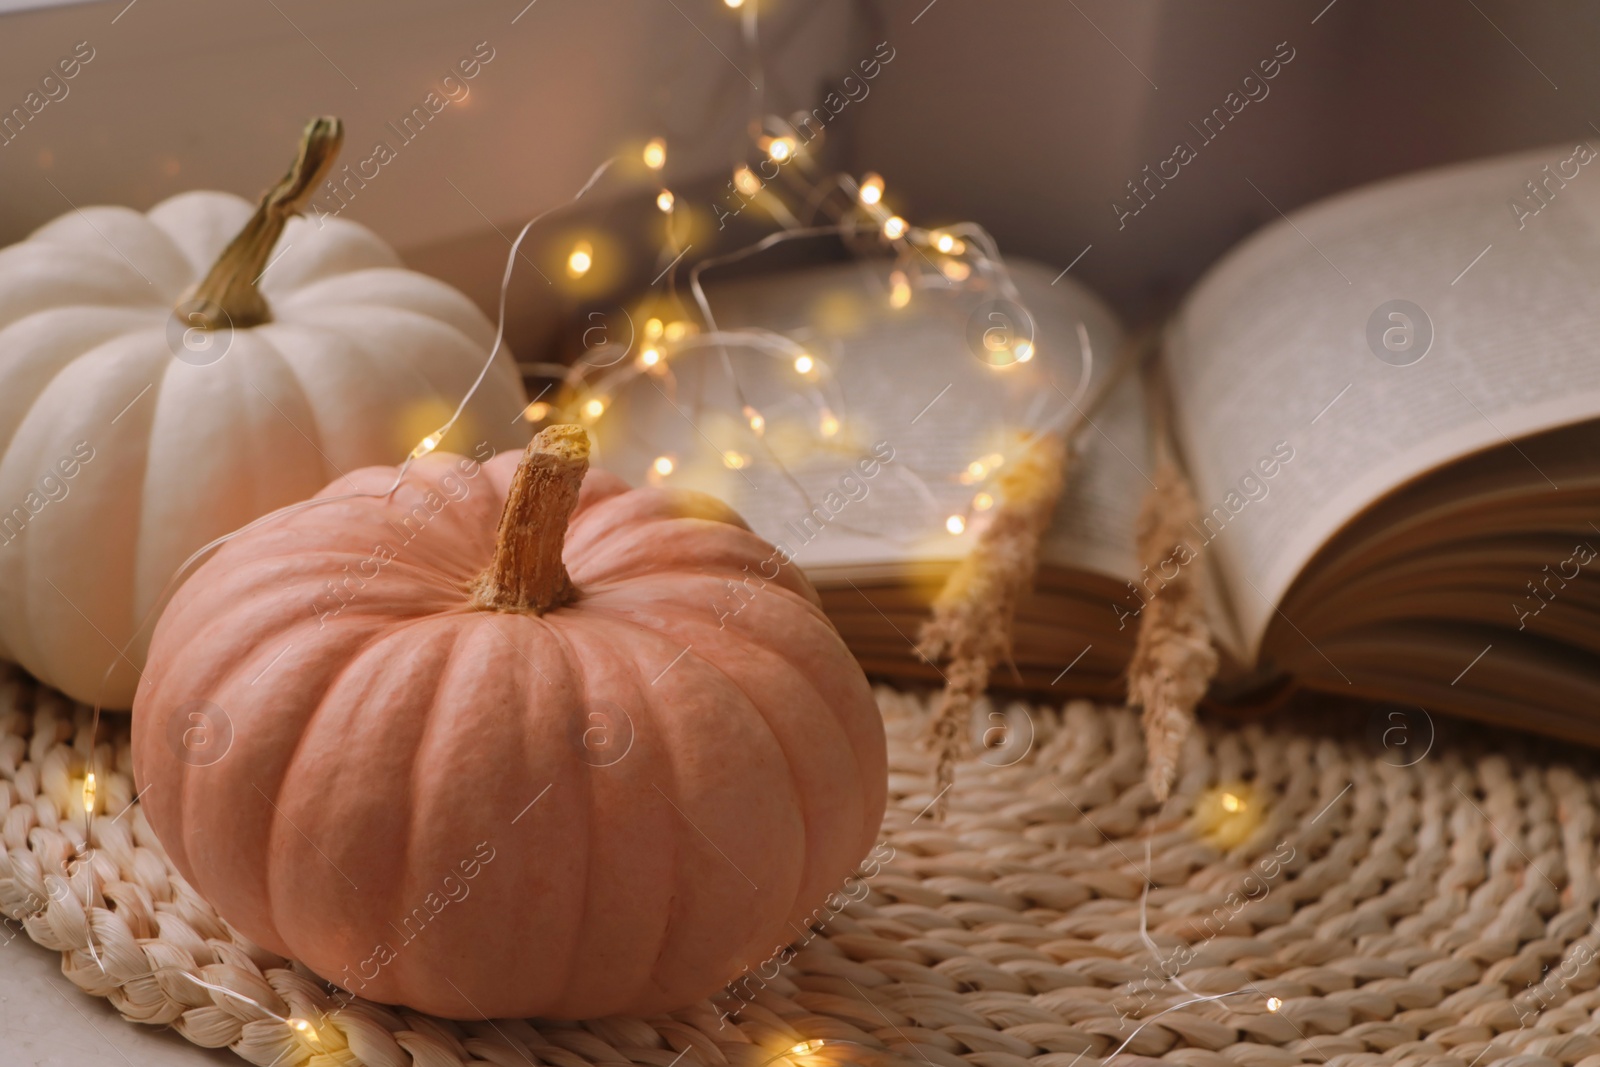 Photo of Pumpkins and book on wicker mat indoors